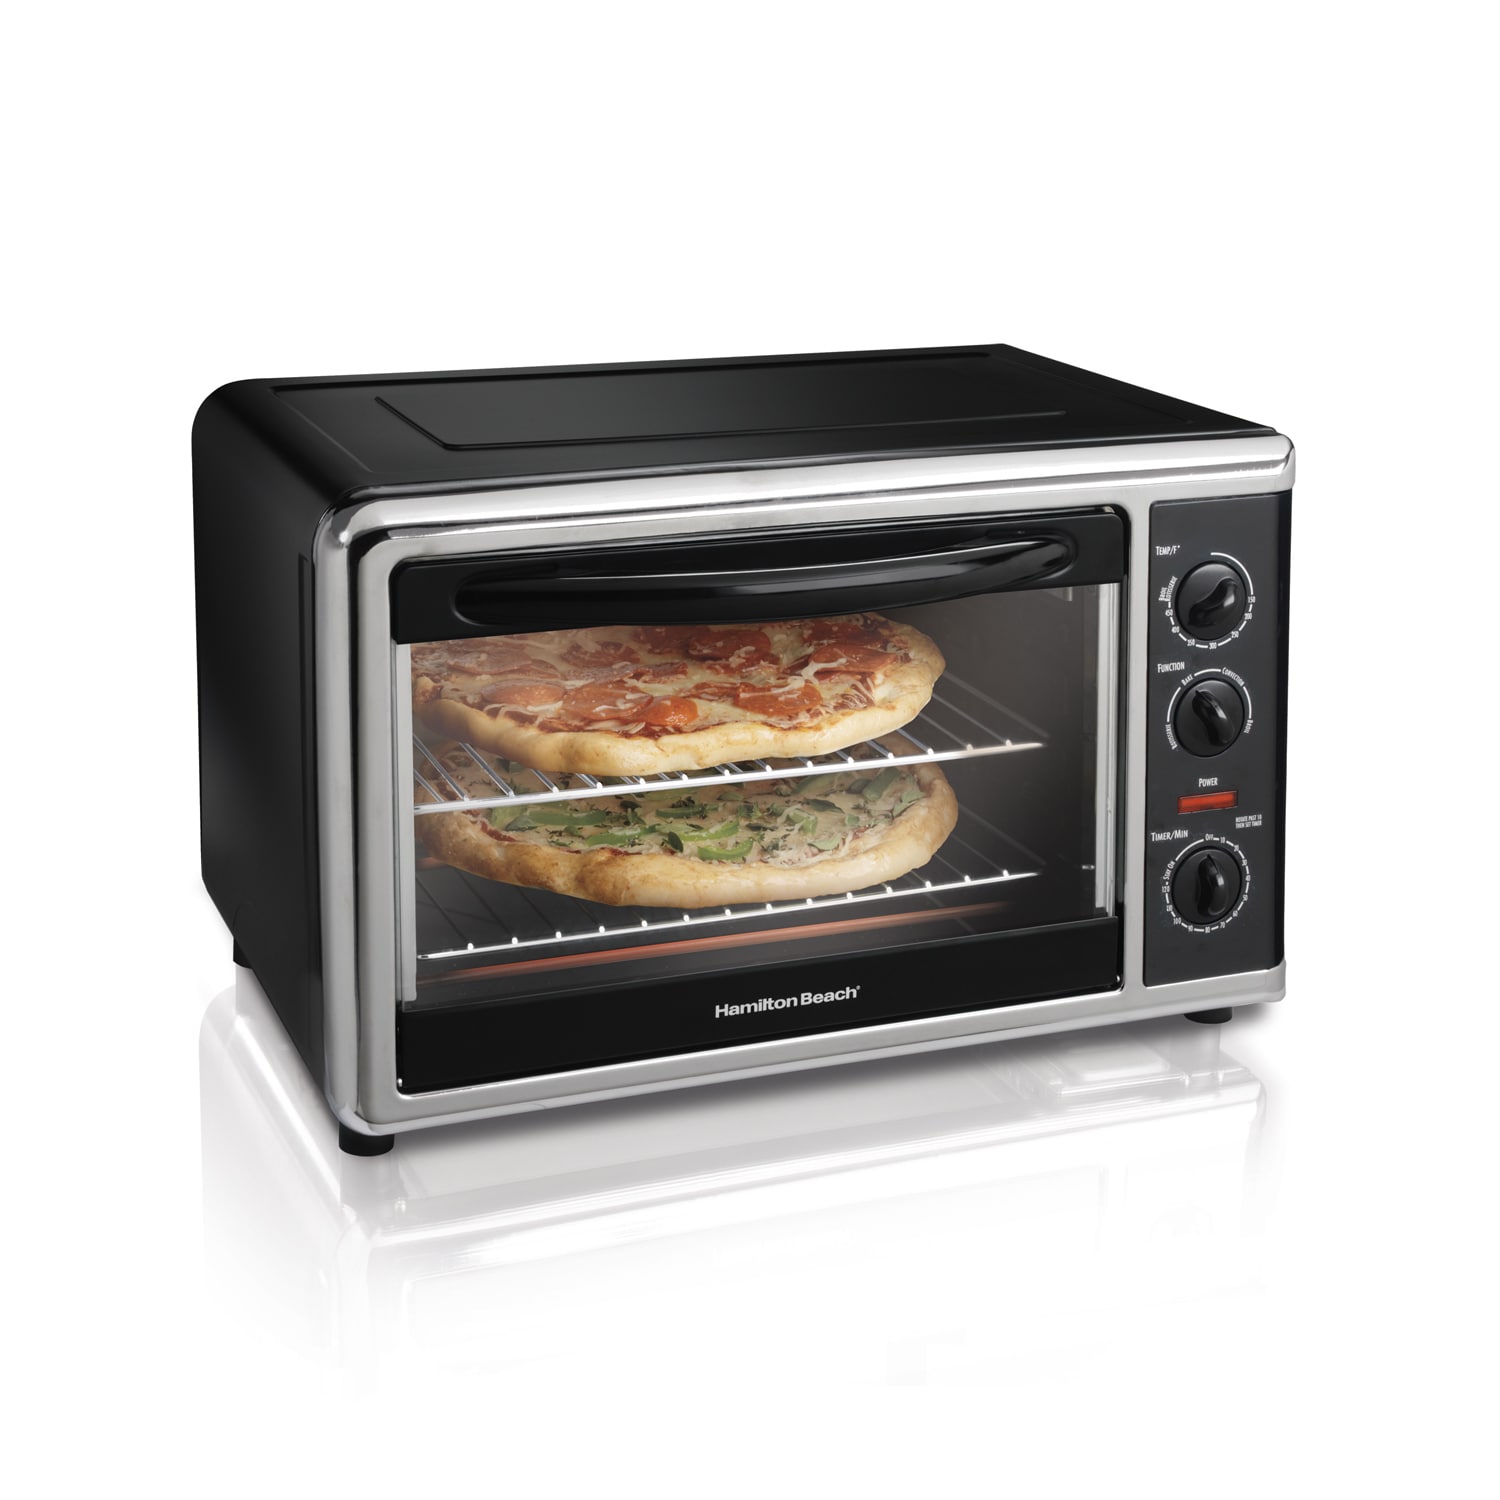 https://ak1.ostkcdn.com/images/products/6075073/Hamilton-Beach-Black-Countertop-Oven-with-Convection-and-Rotisserie-d9649799-5d67-43cc-92e0-ca4671d84d64.jpg